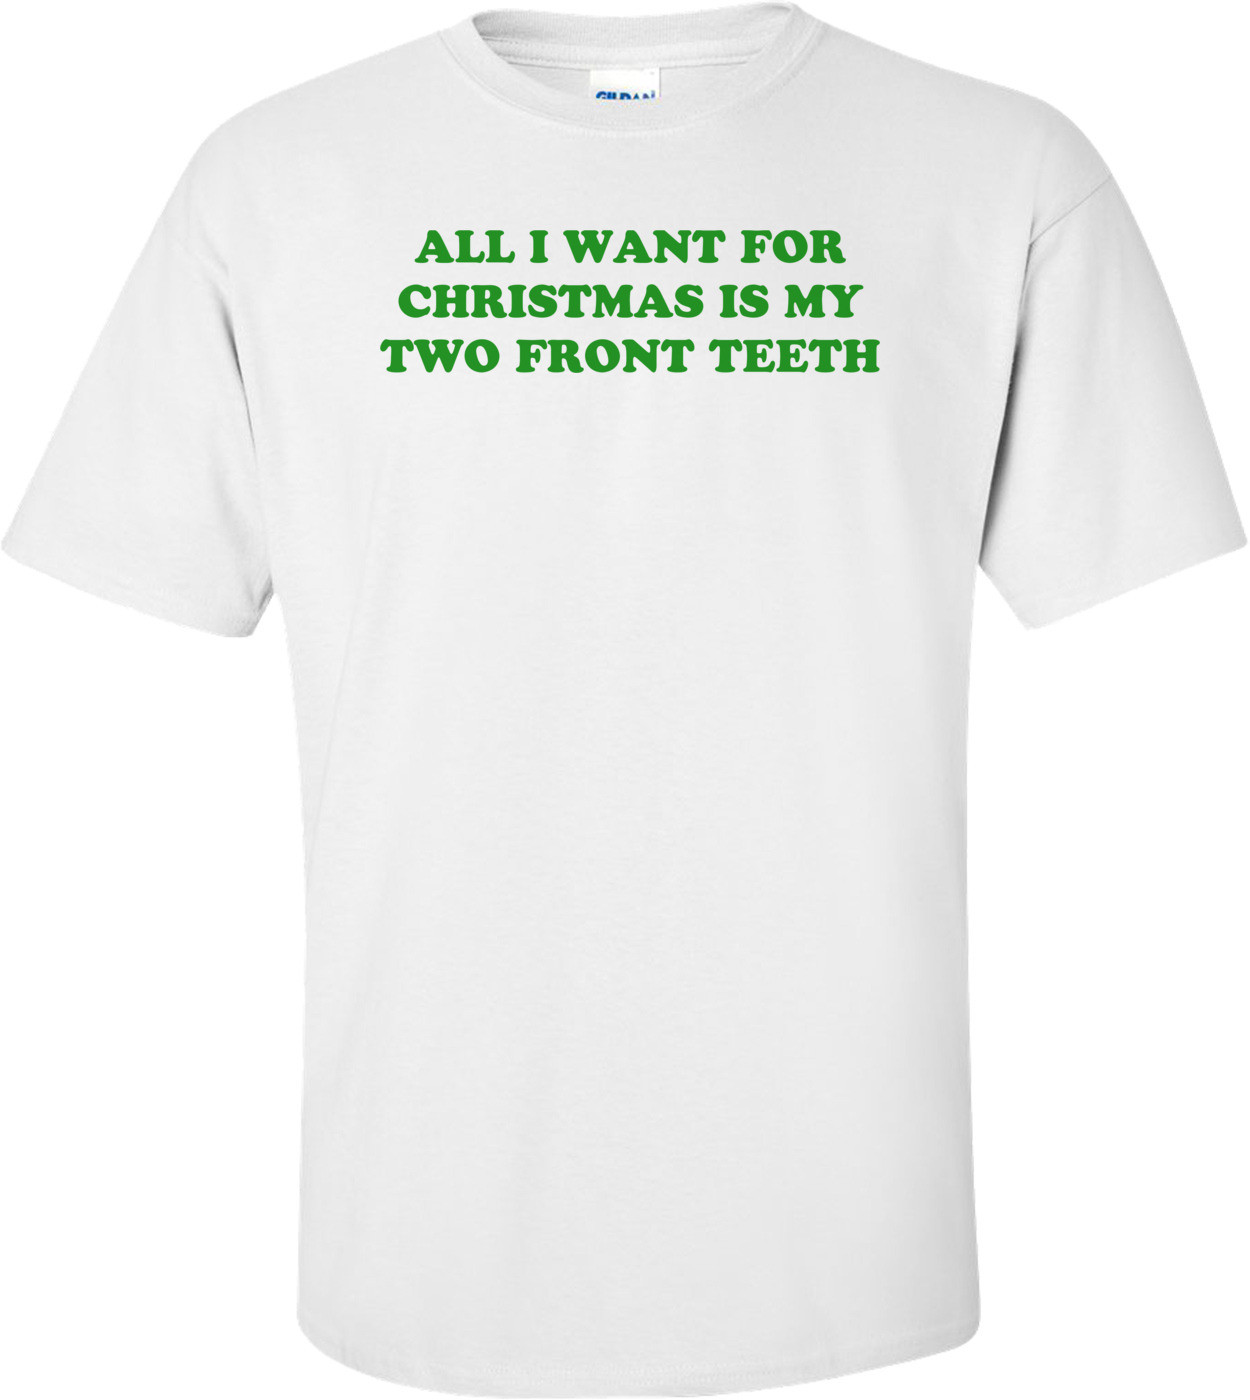 ALL I WANT FOR CHRISTMAS IS MY TWO FRONT TEETH Shirt